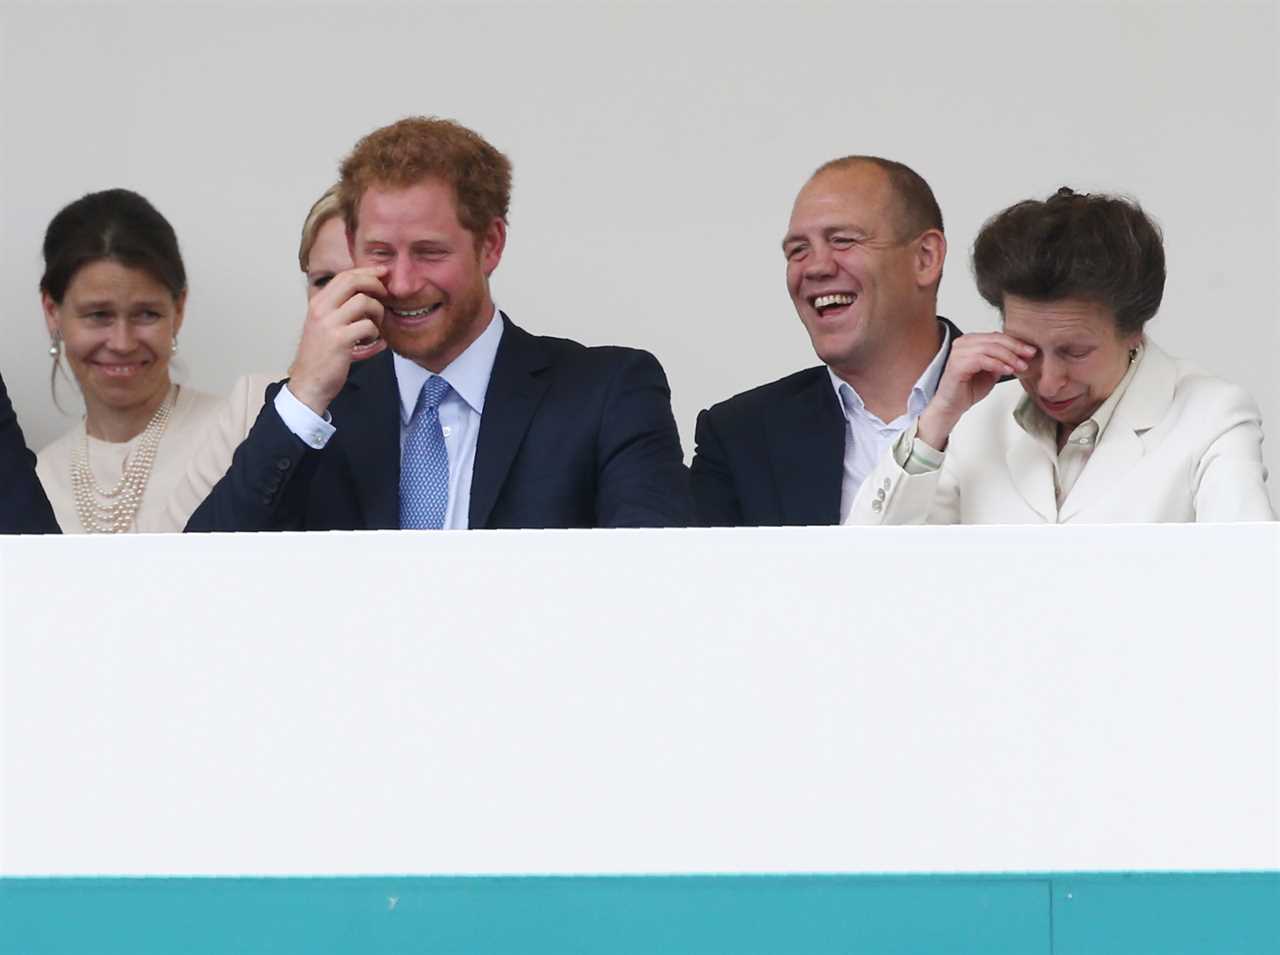 Inside Mike Tindall’s special relationship with Princess Anne & what Royal family secretly thought when he married Zara